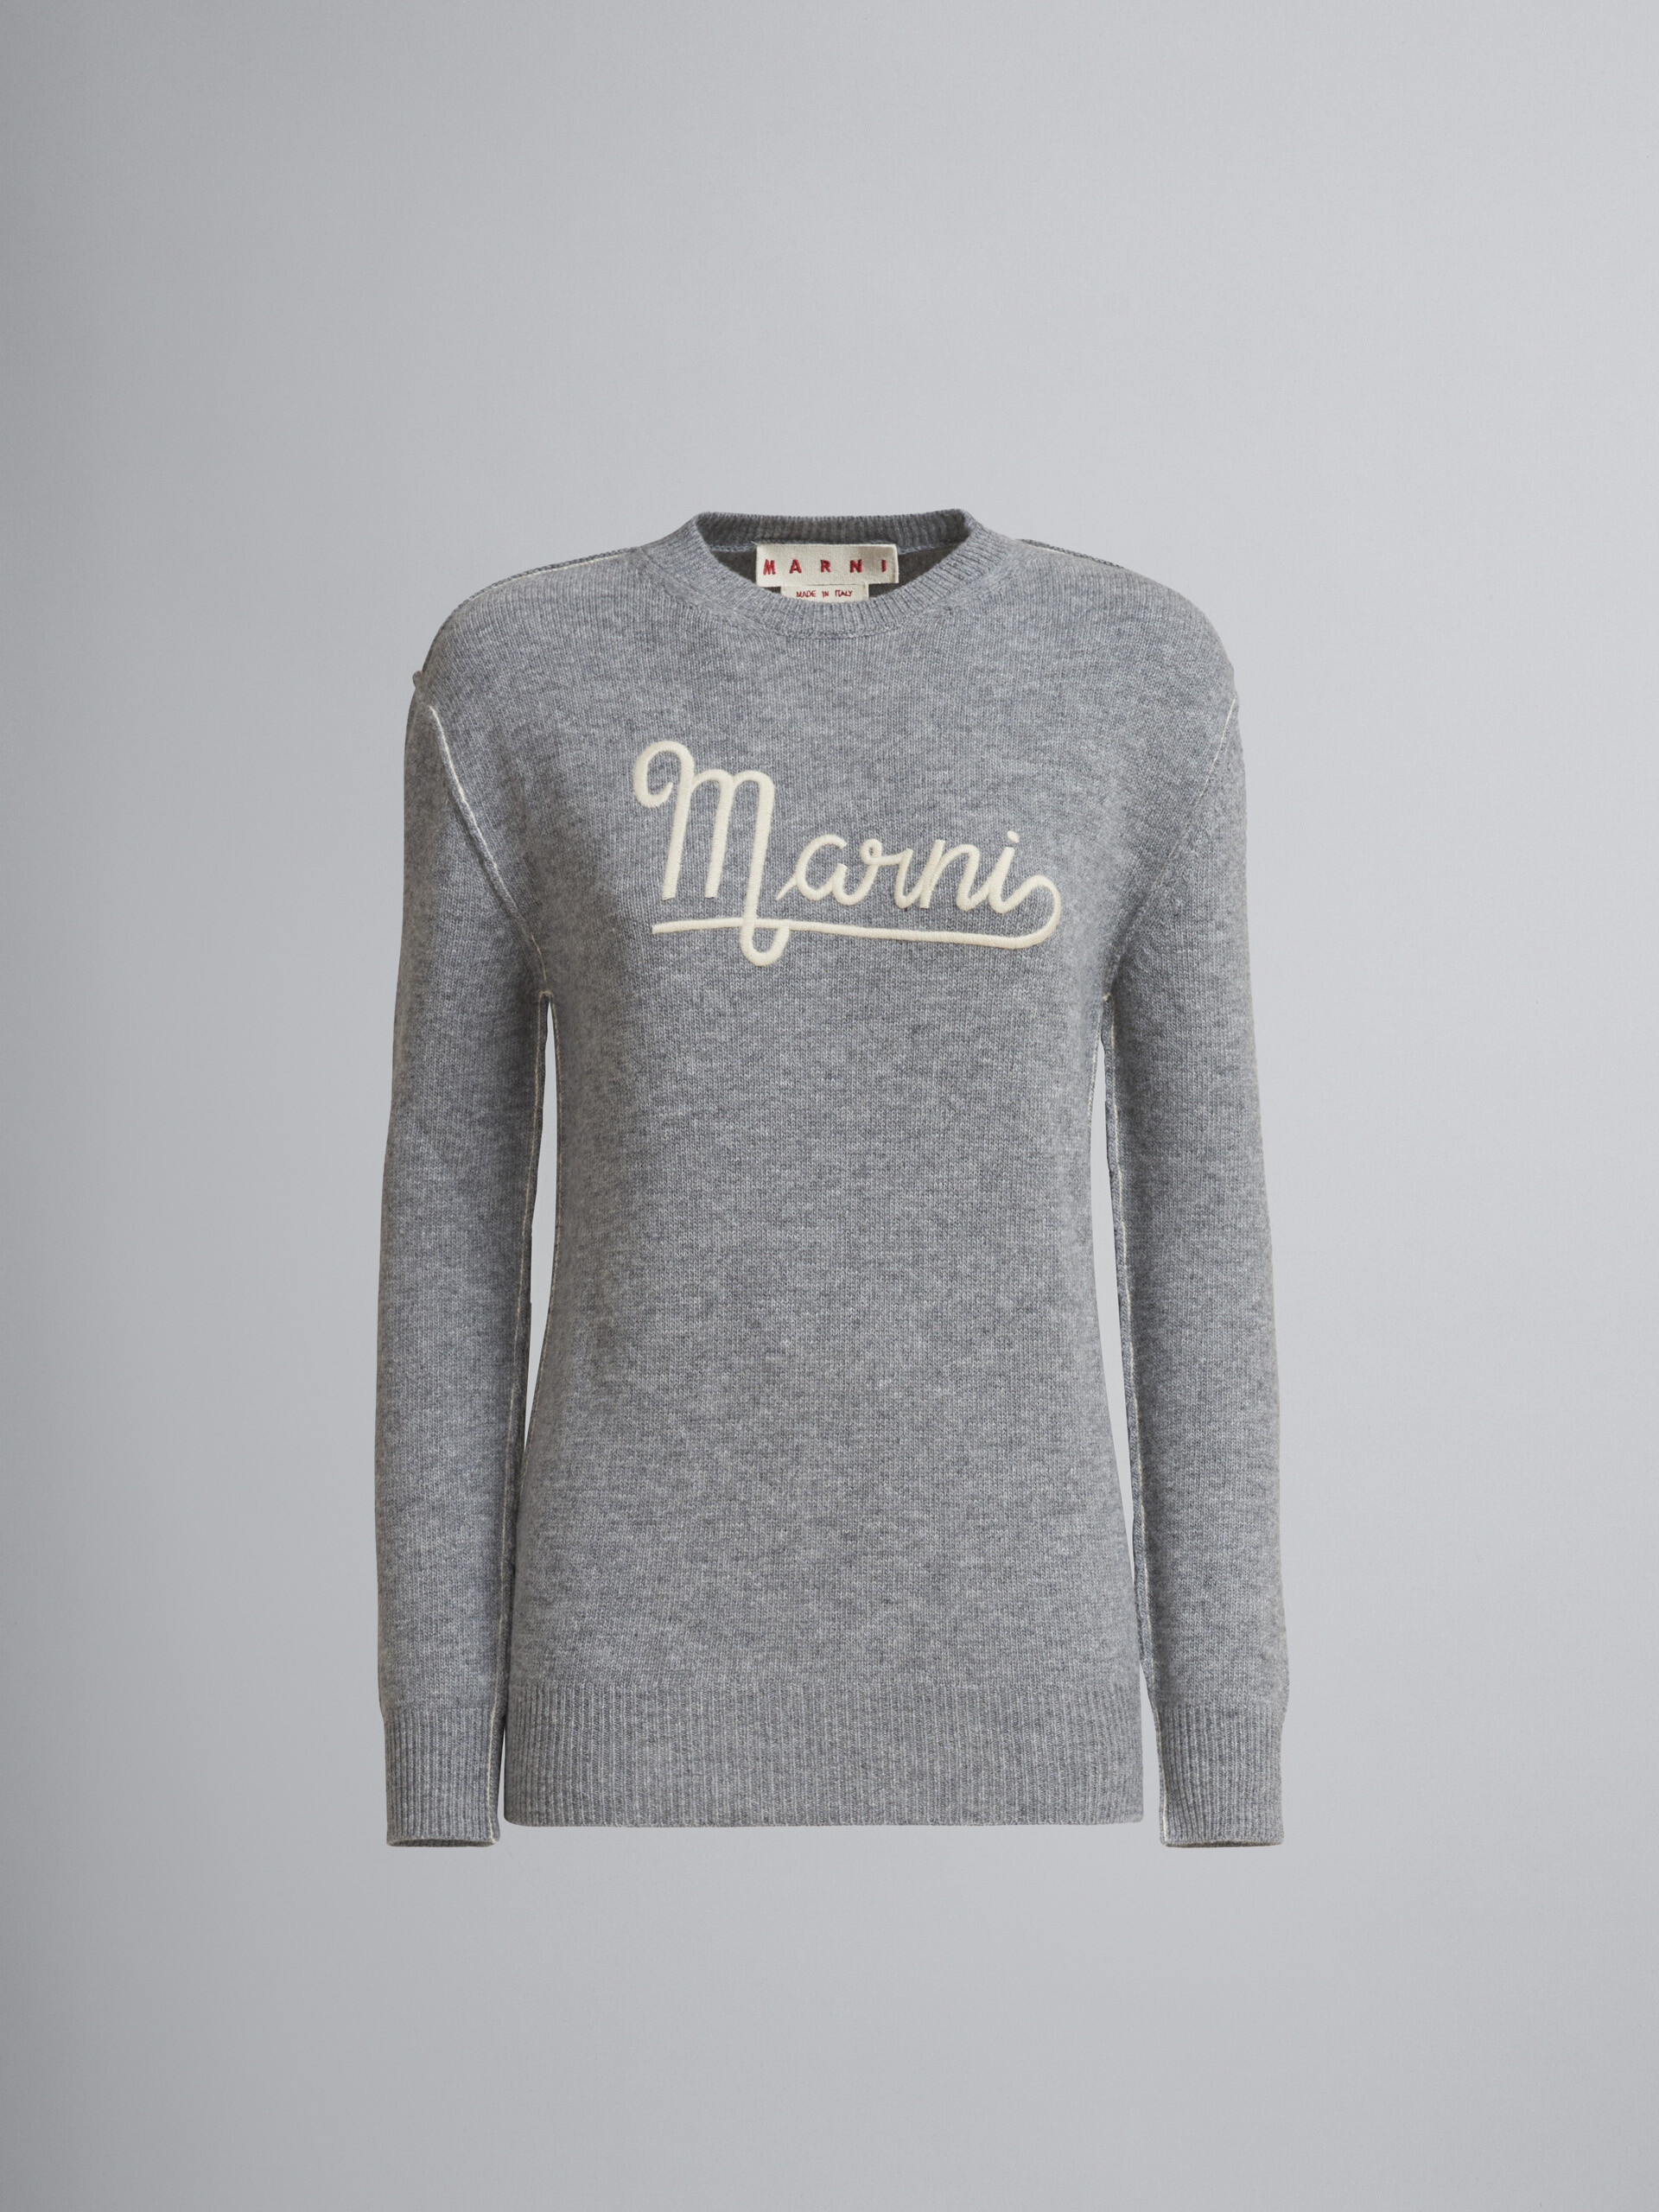 Grey Shetland wool long-sleeved sweater with embroidered Marni logo - Pullovers - Image 1